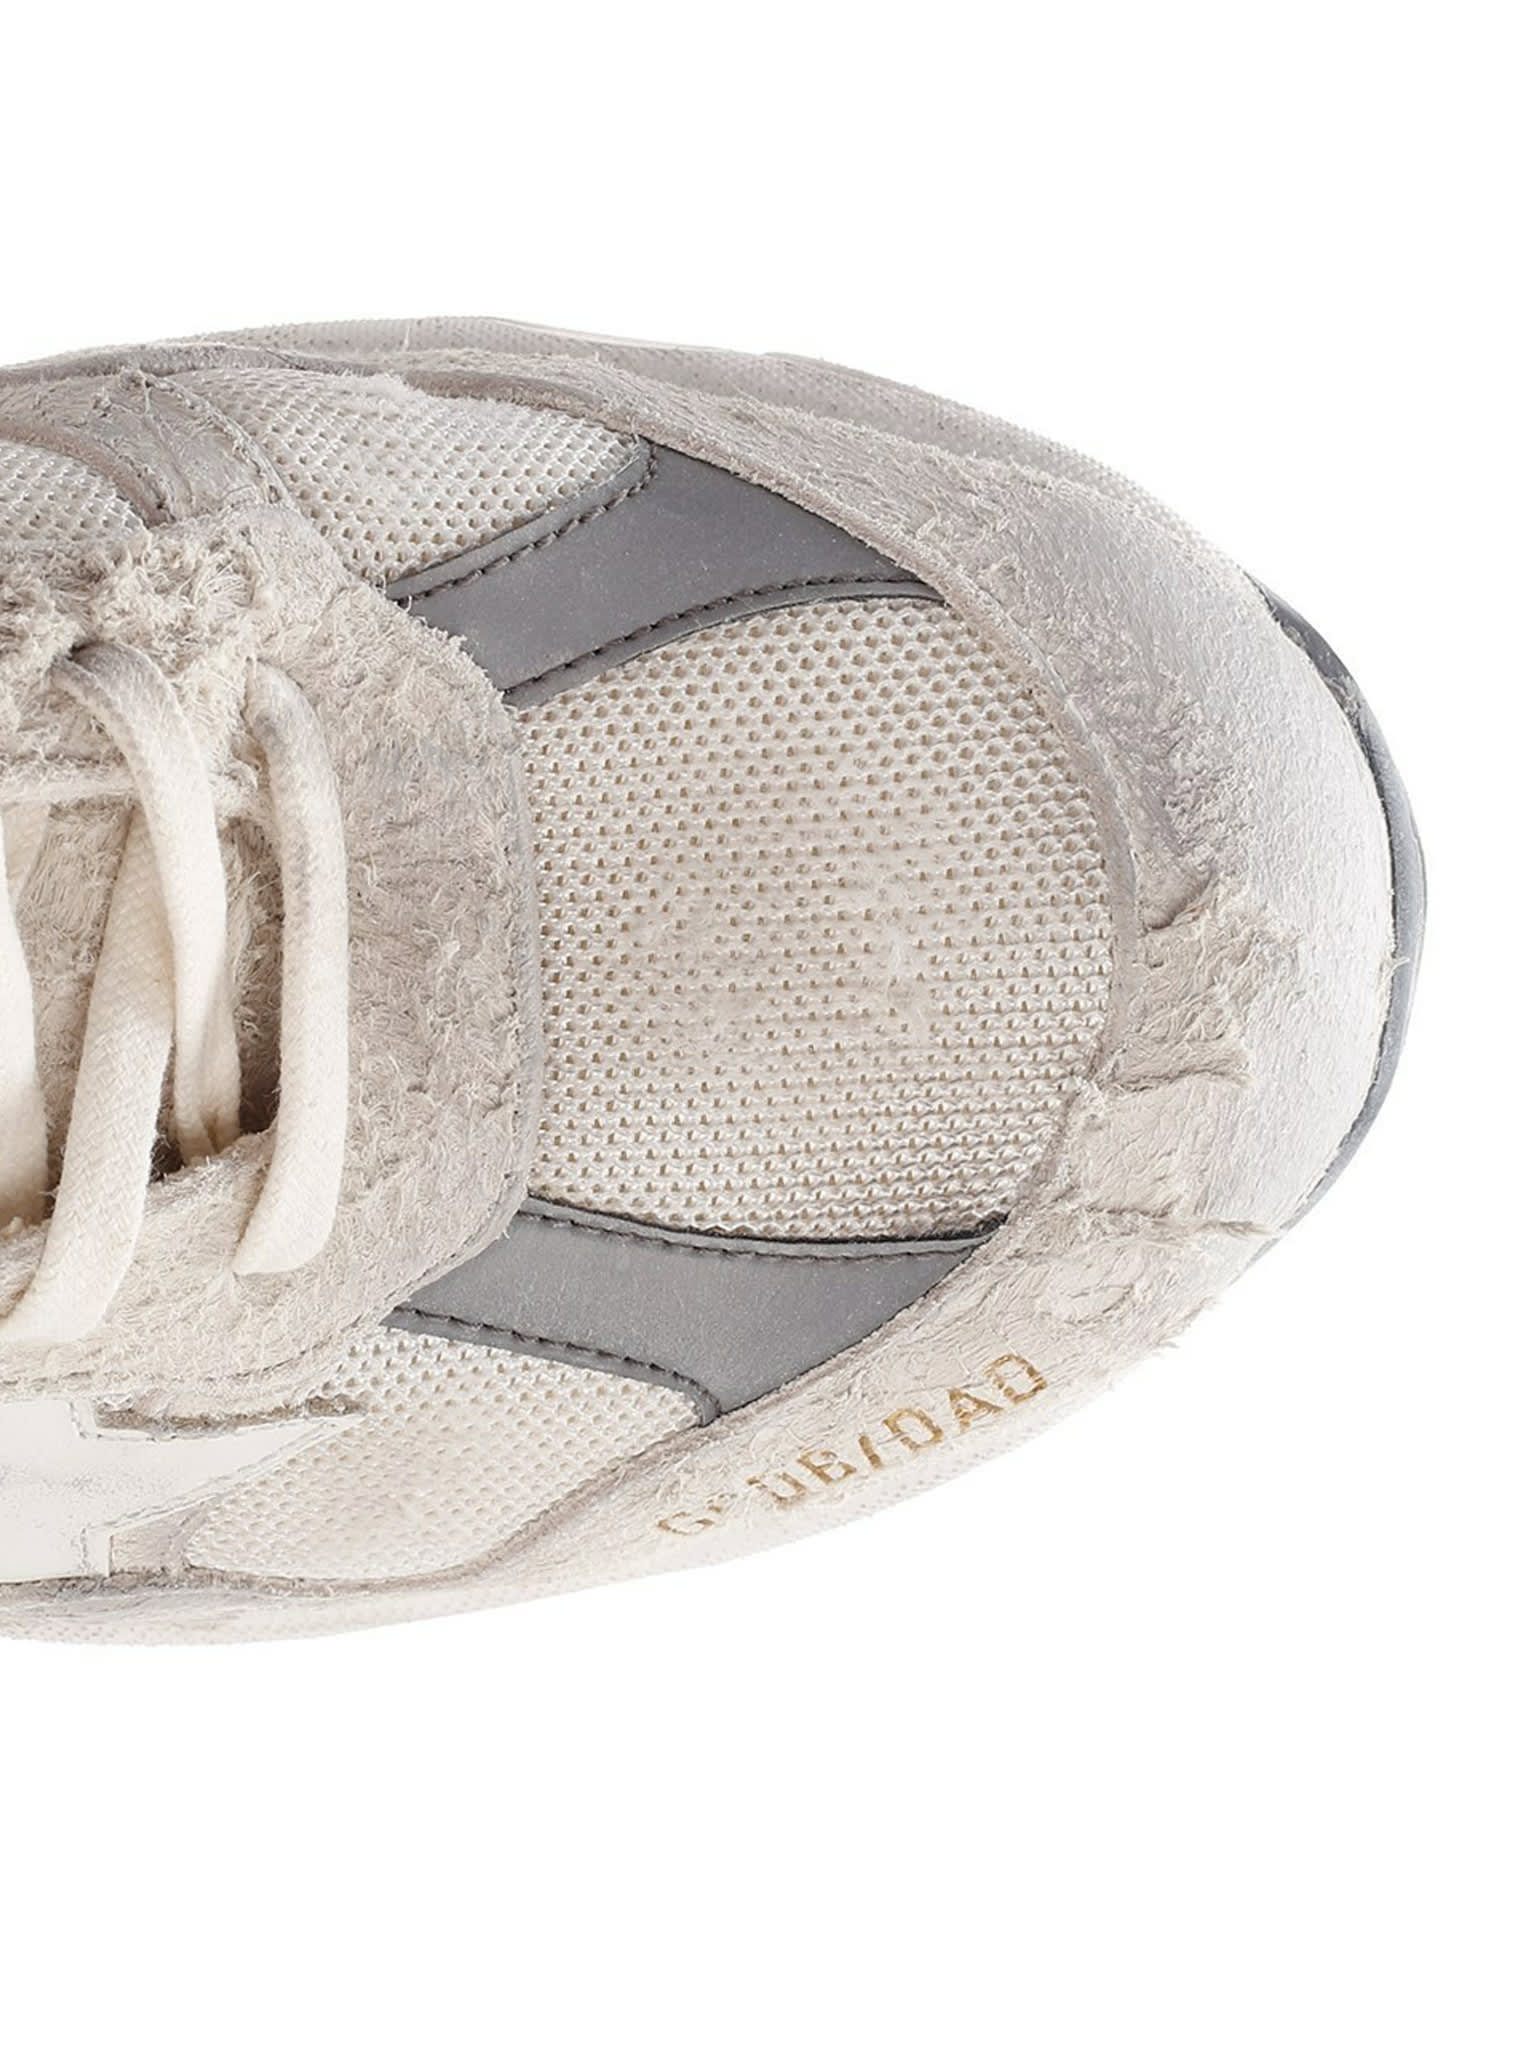 Shop Golden Goose Running Dad Net And Suede Upper Leather Star And Heel Suede Spur In White Silver